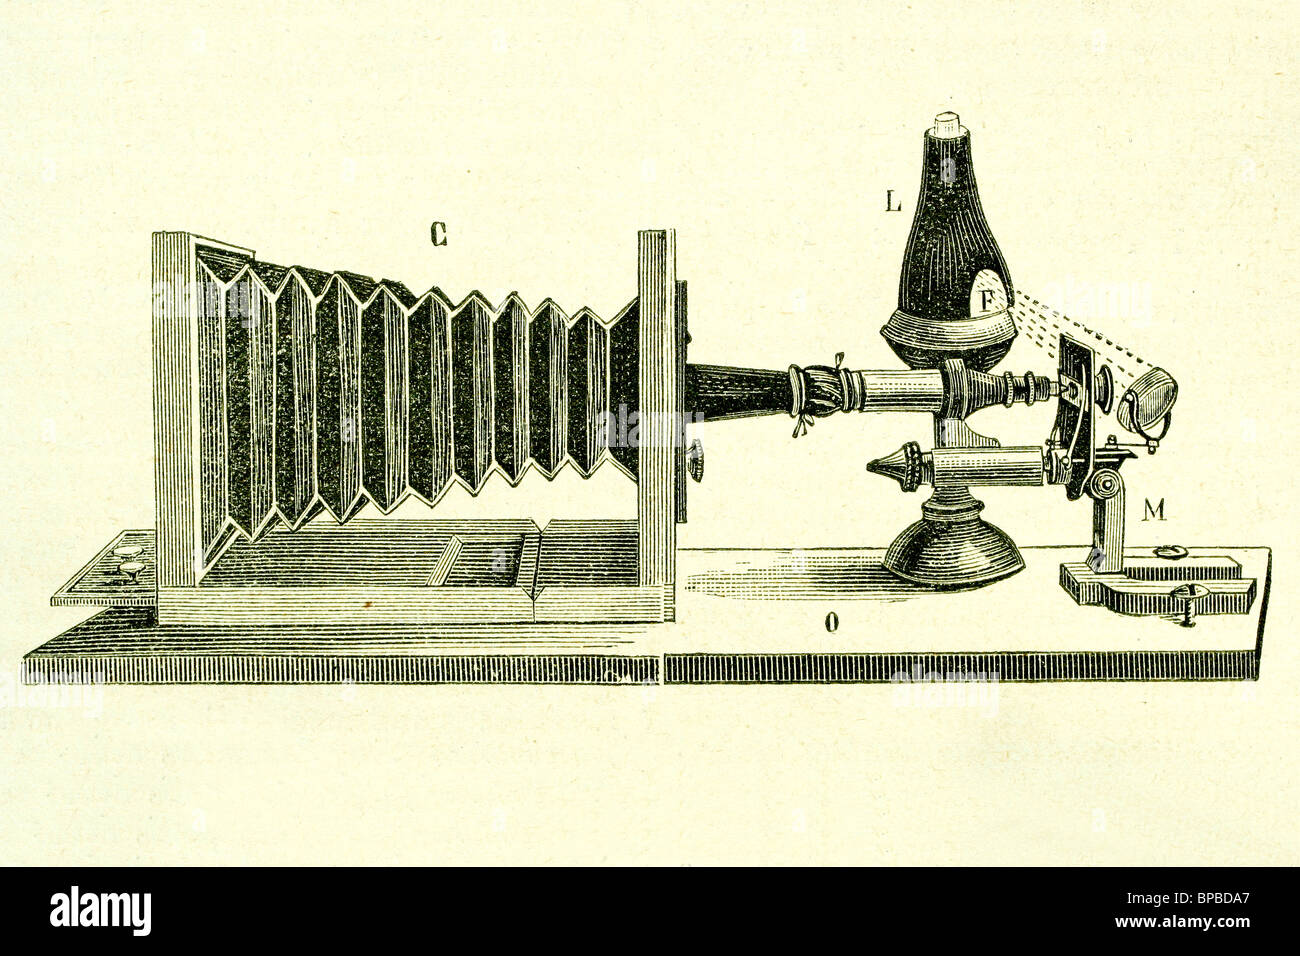 Old microphotography device. Antique illustration. 1889. Stock Photo